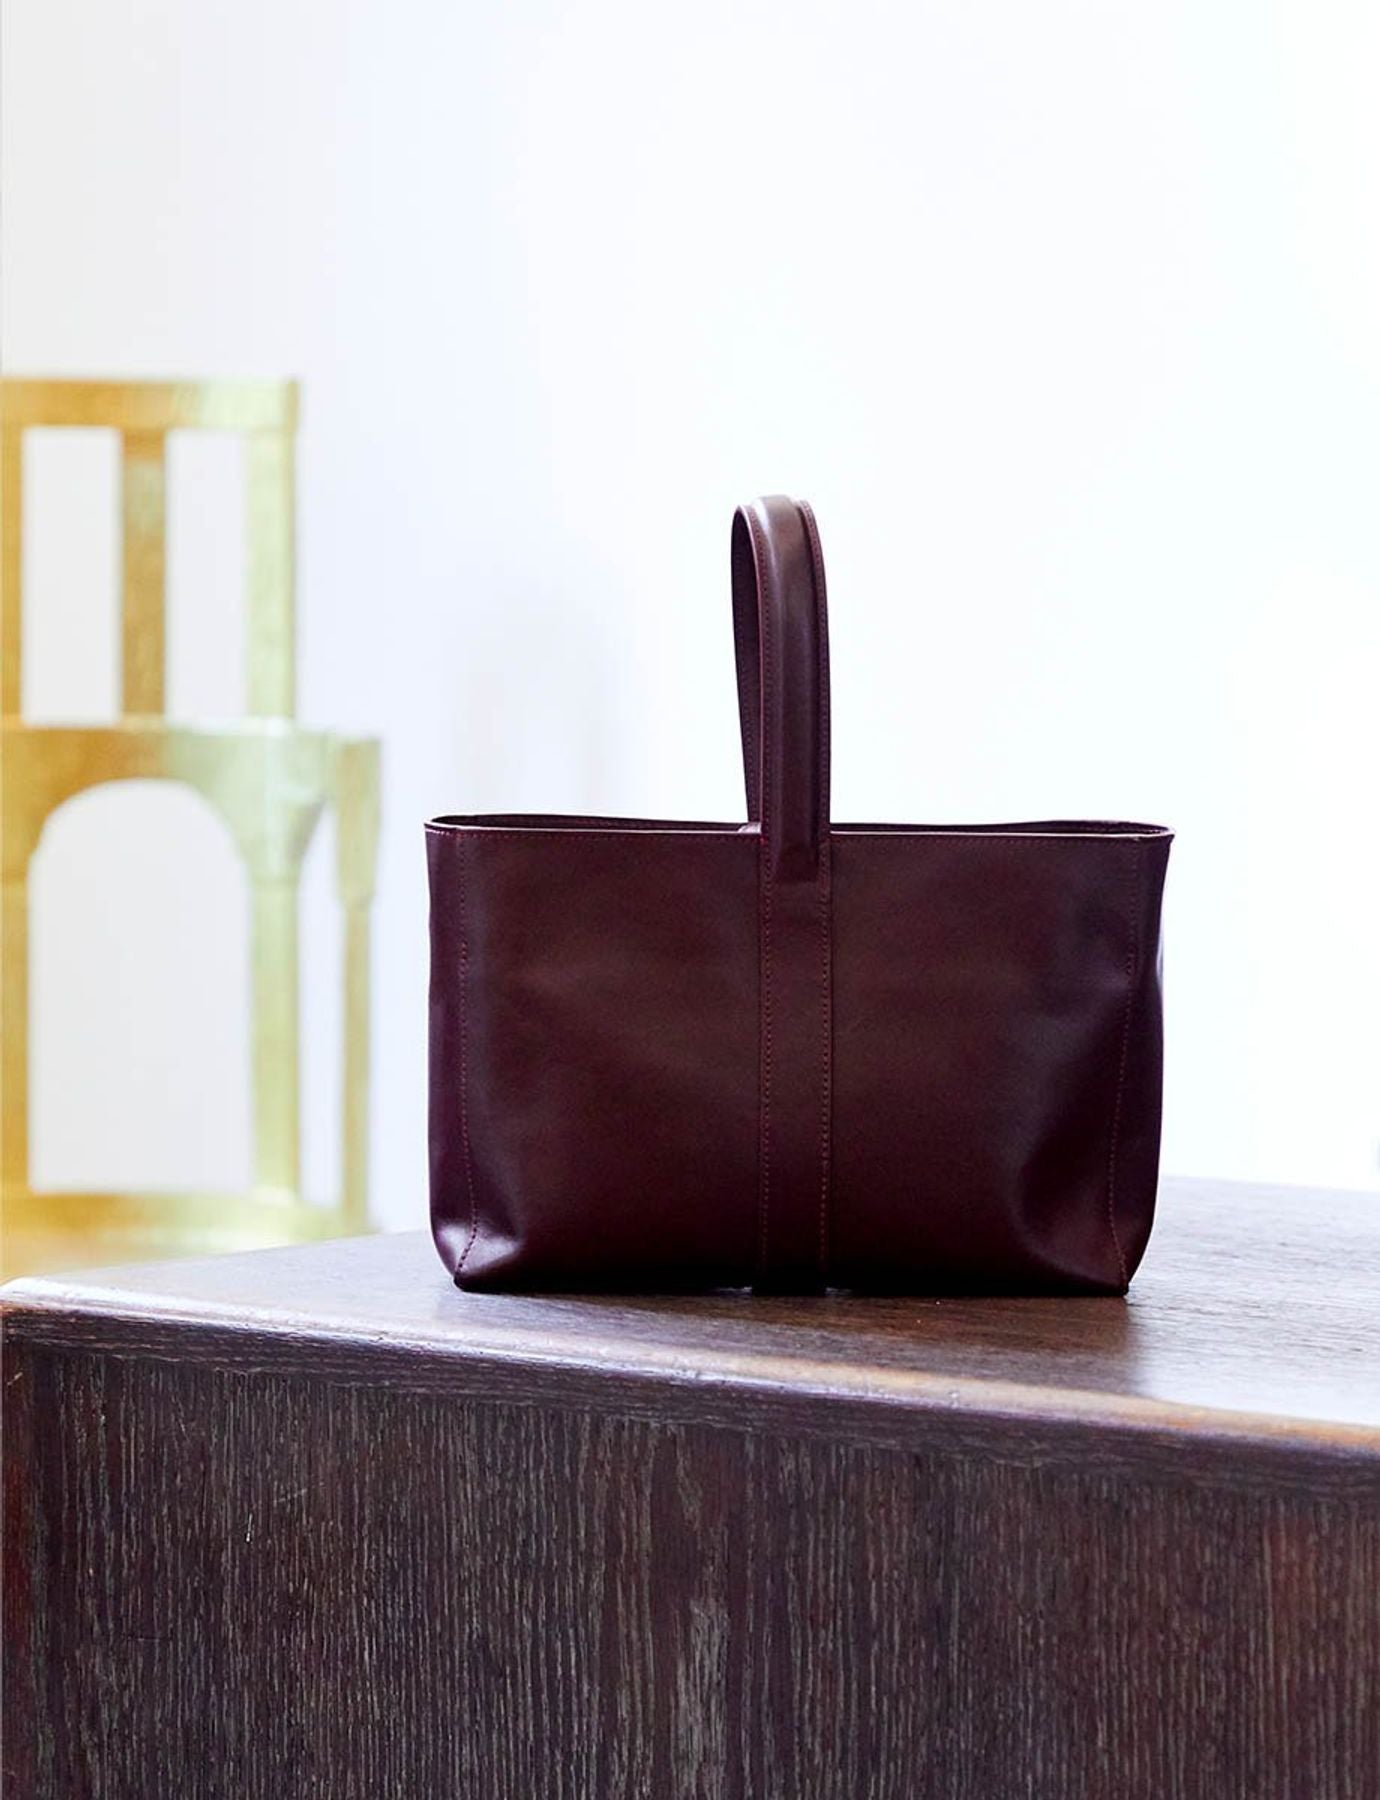 bag-leonore-size-s-in-leather-bordeaux